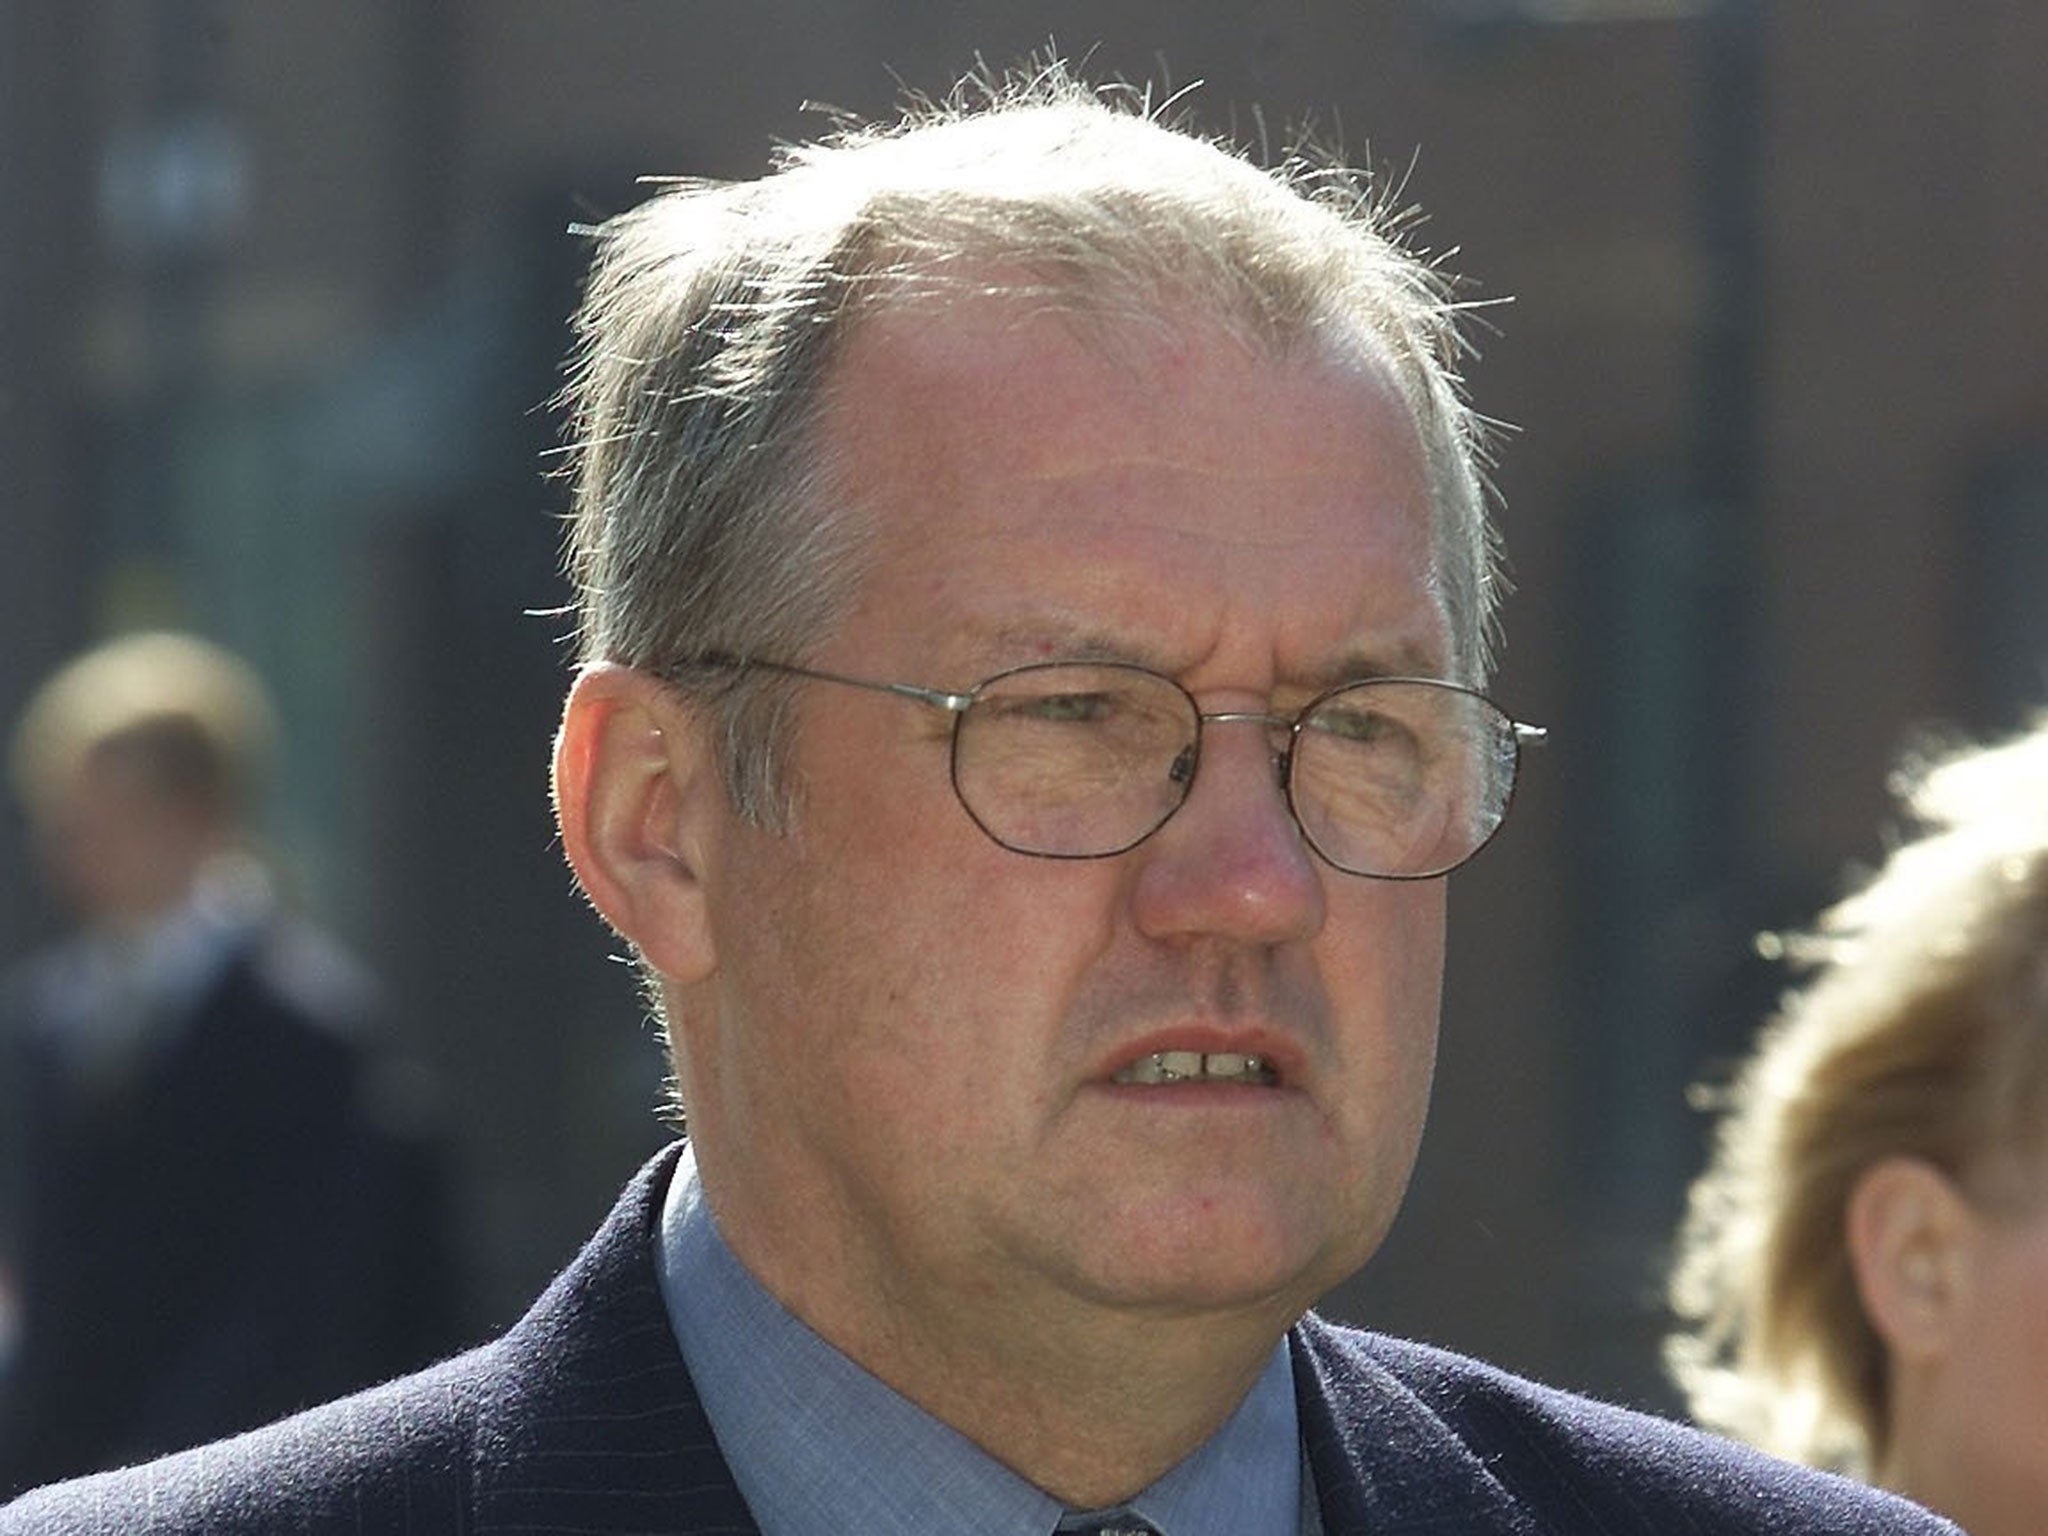 The jury has heard that match commander Ch Supt David Duckenfield ordered an exit gate at the ground to be opened